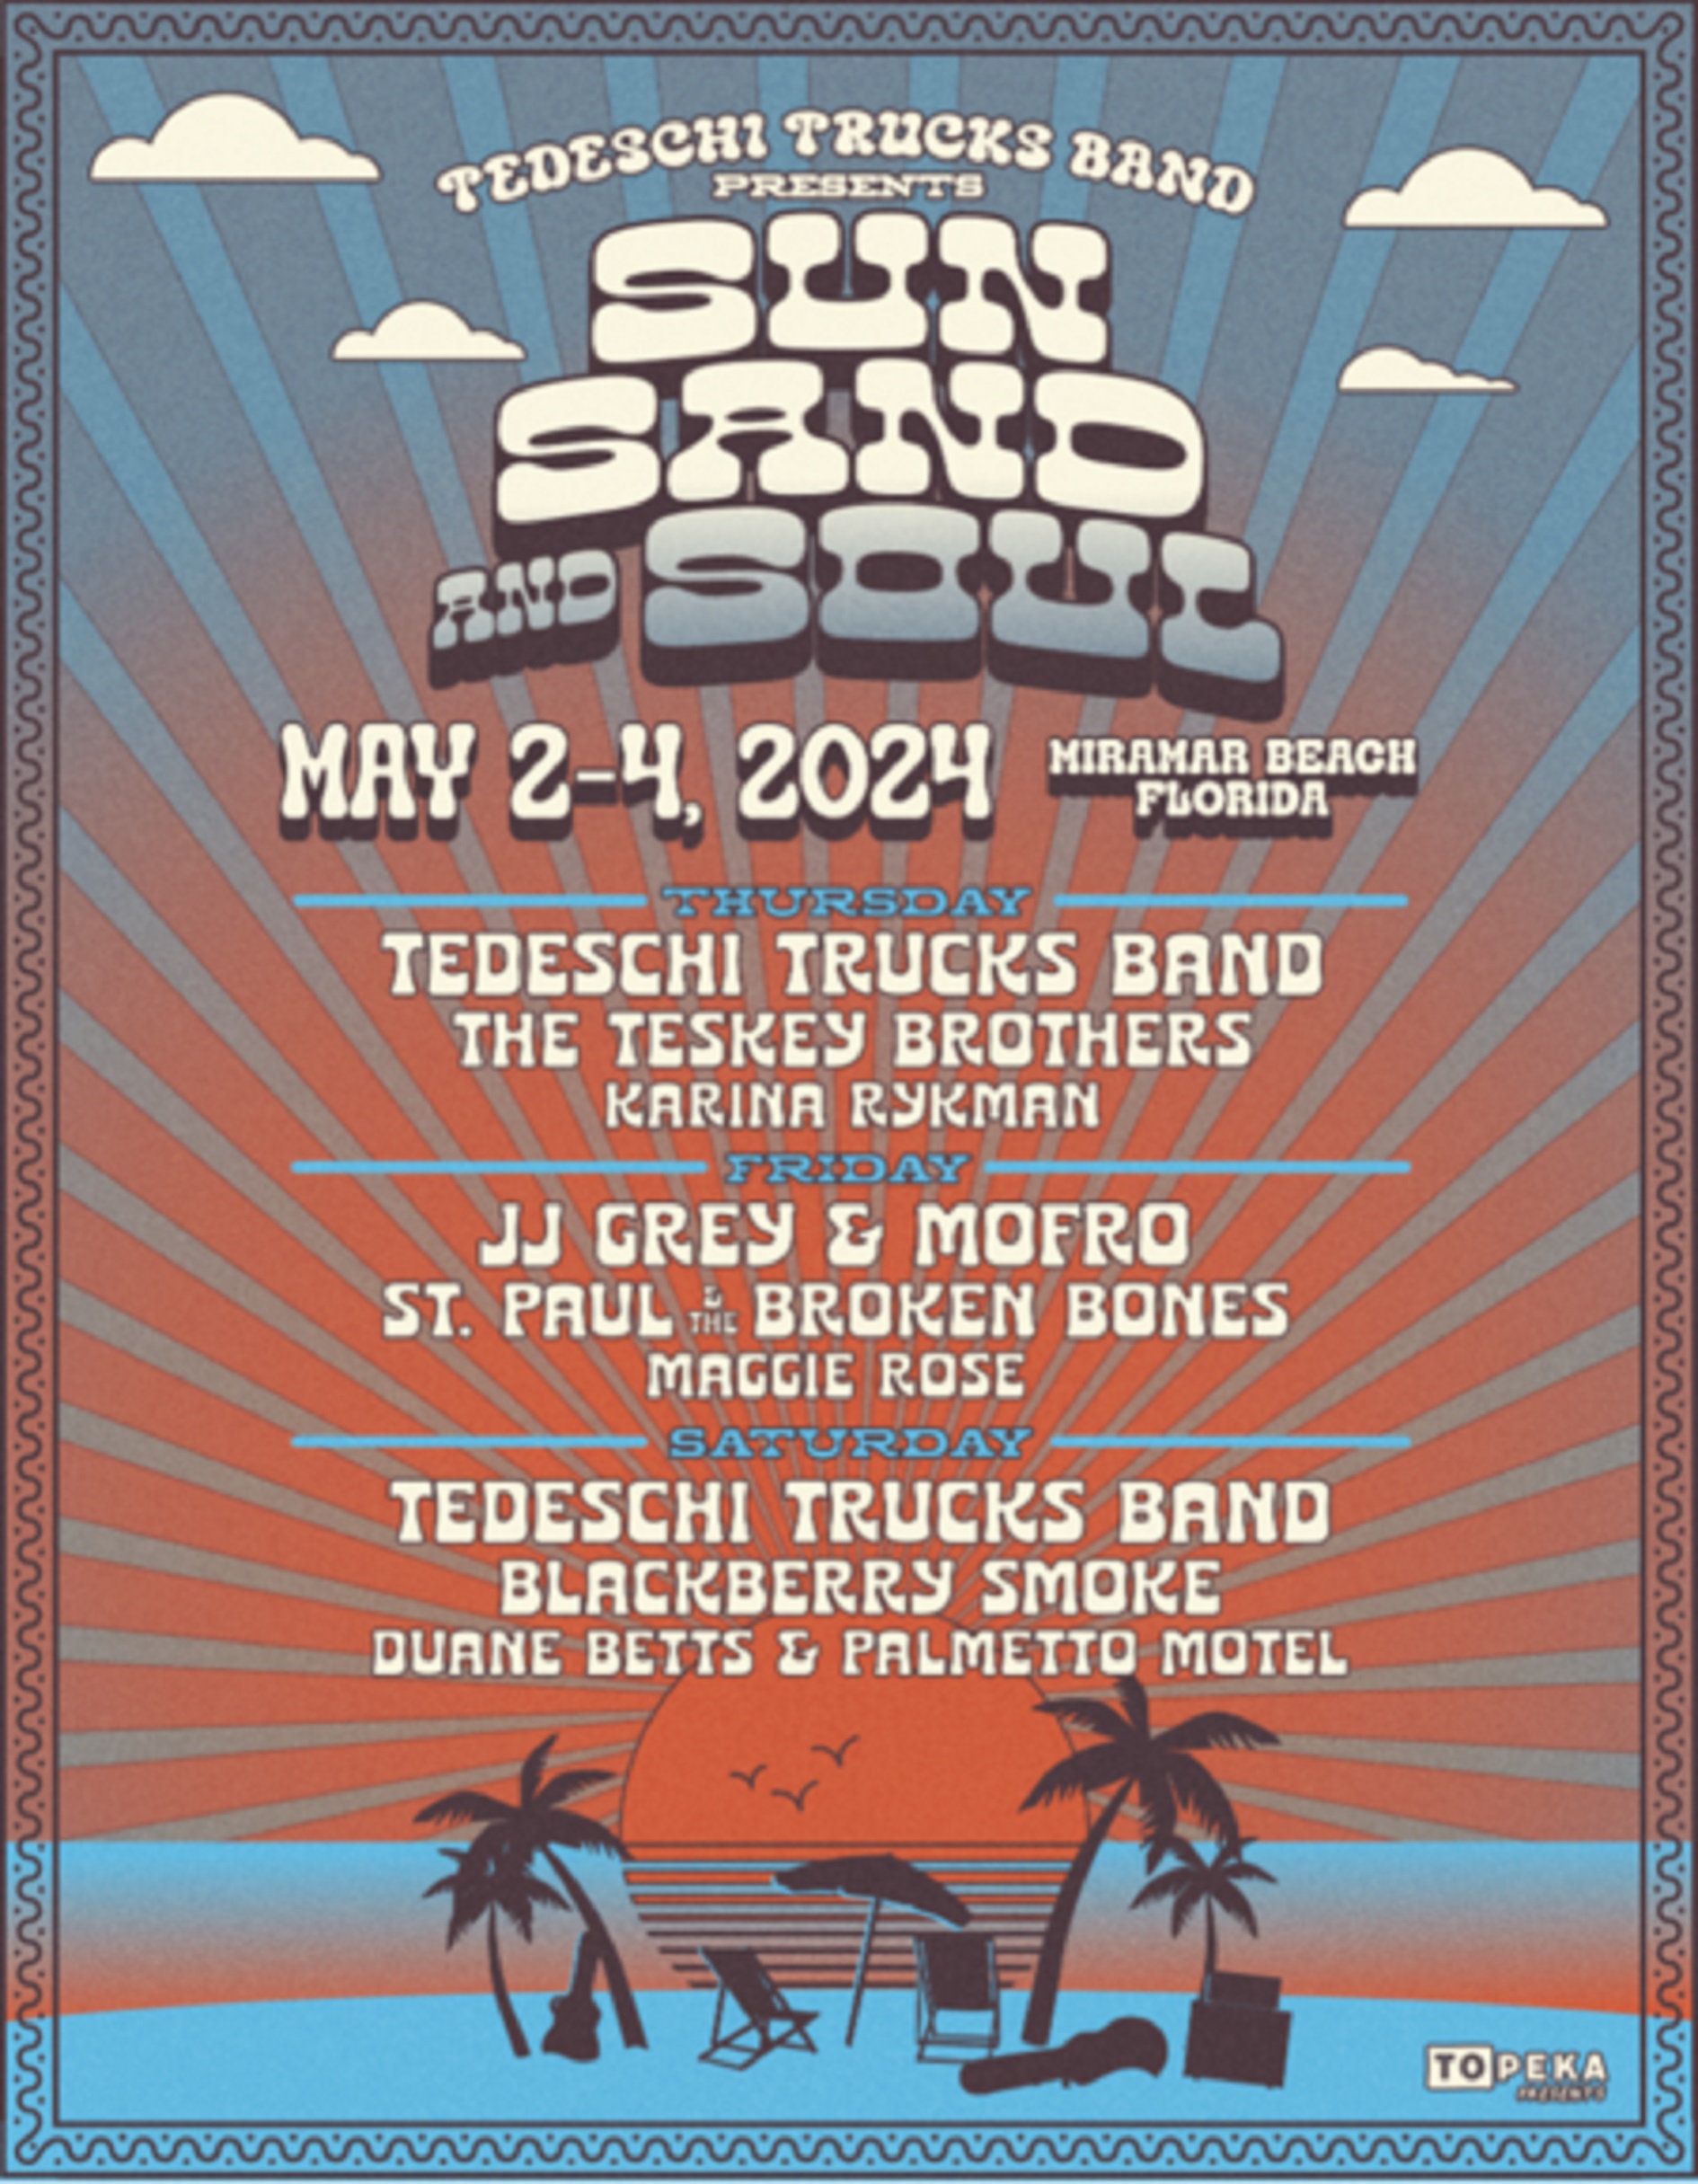 Topeka partners with Tedeschi Trucks Band to present "Sun, Sand and Soul Beach Weekend"